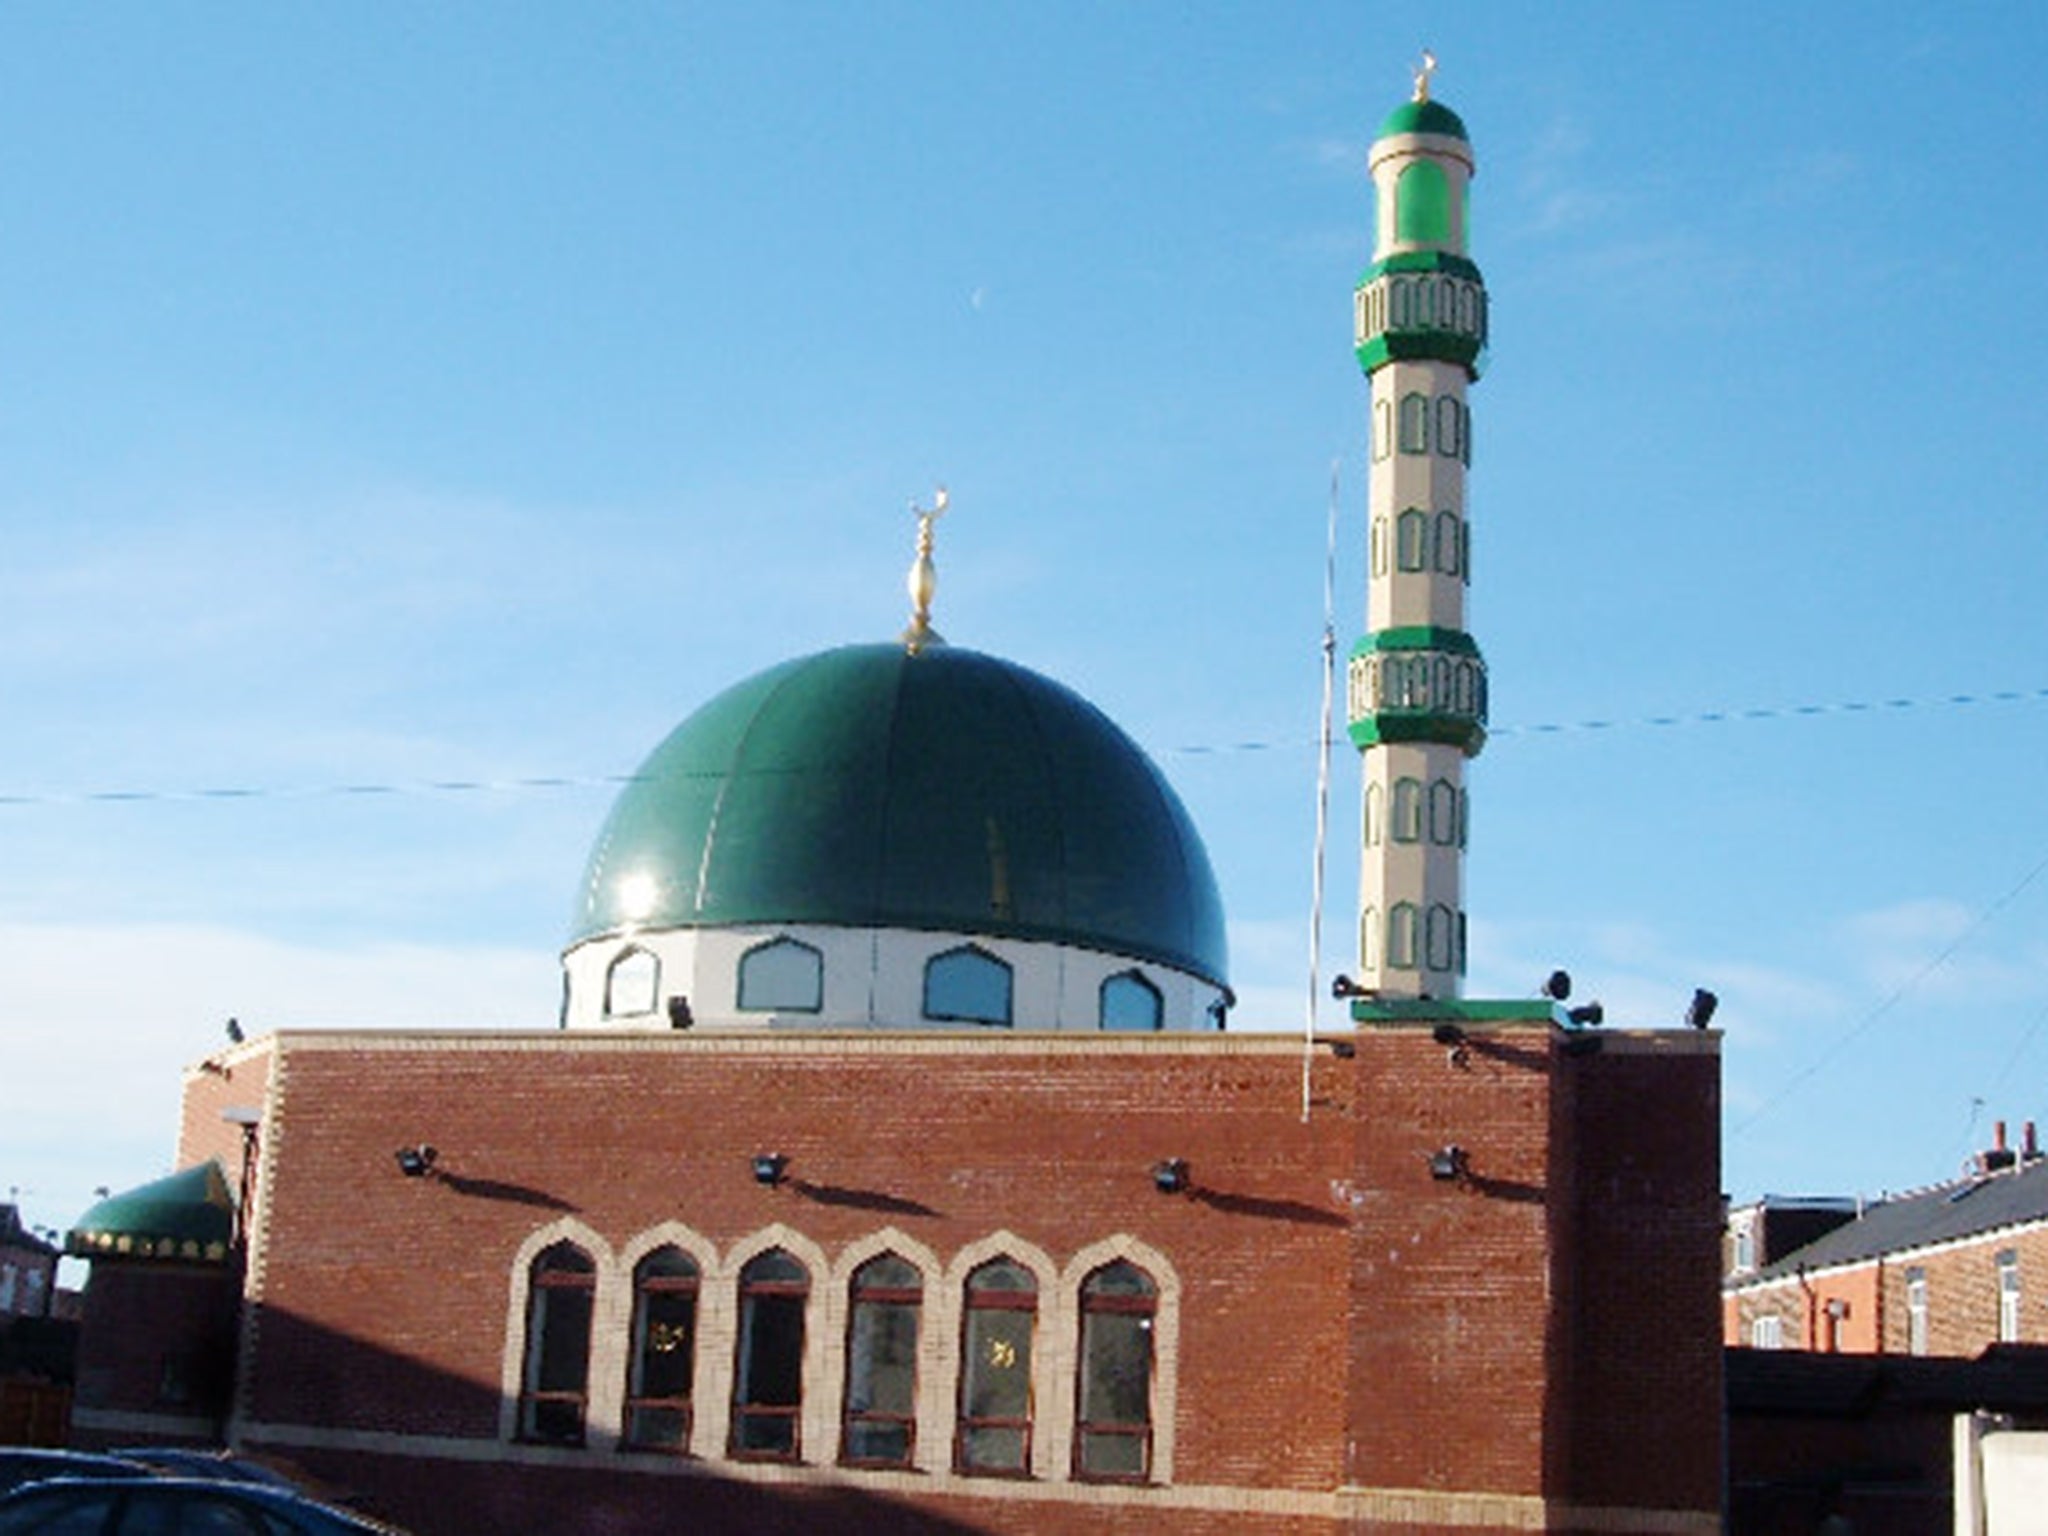 Mr Uddin was the former imam of Rochdale’s Jalalia Jaame Mosque